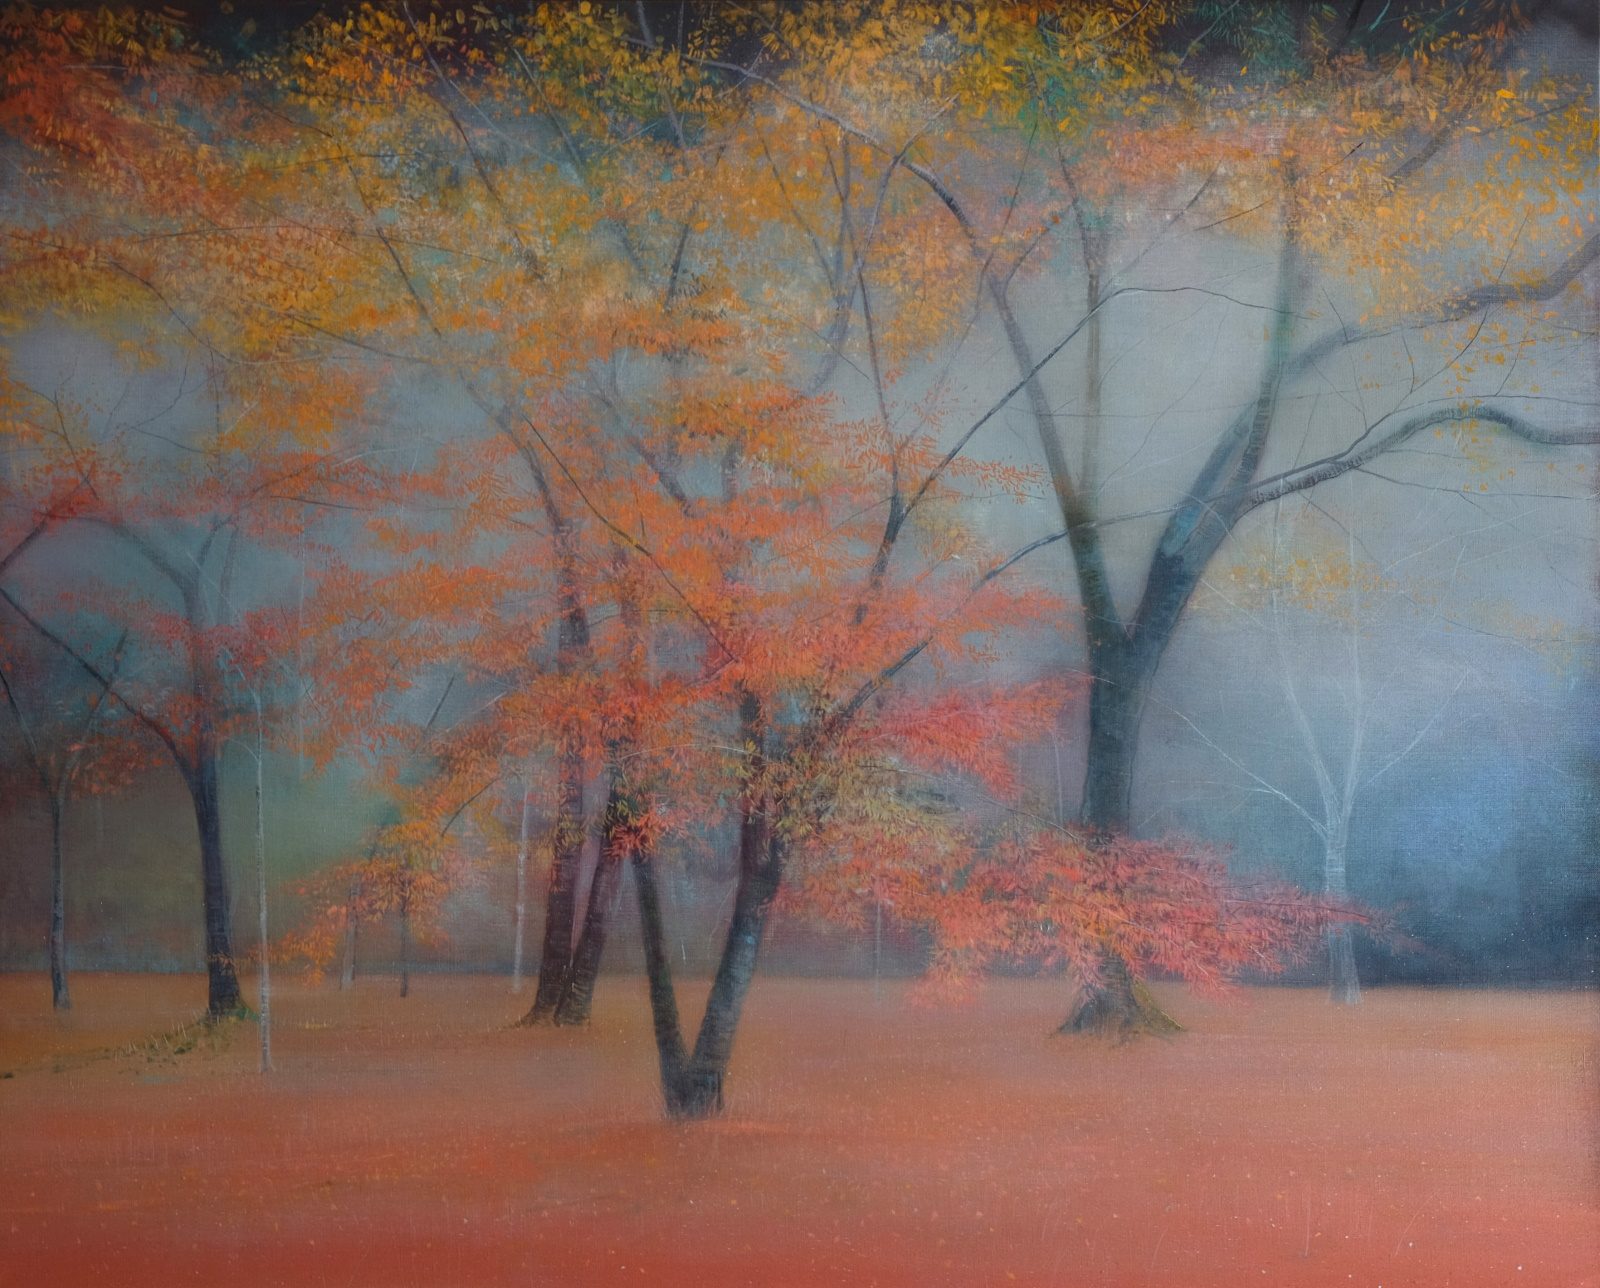 Thomas Lamb, Trees in Autumn, 2019. Oil on linen, 110 x 90cm. Courtesy of Browse & Darby.